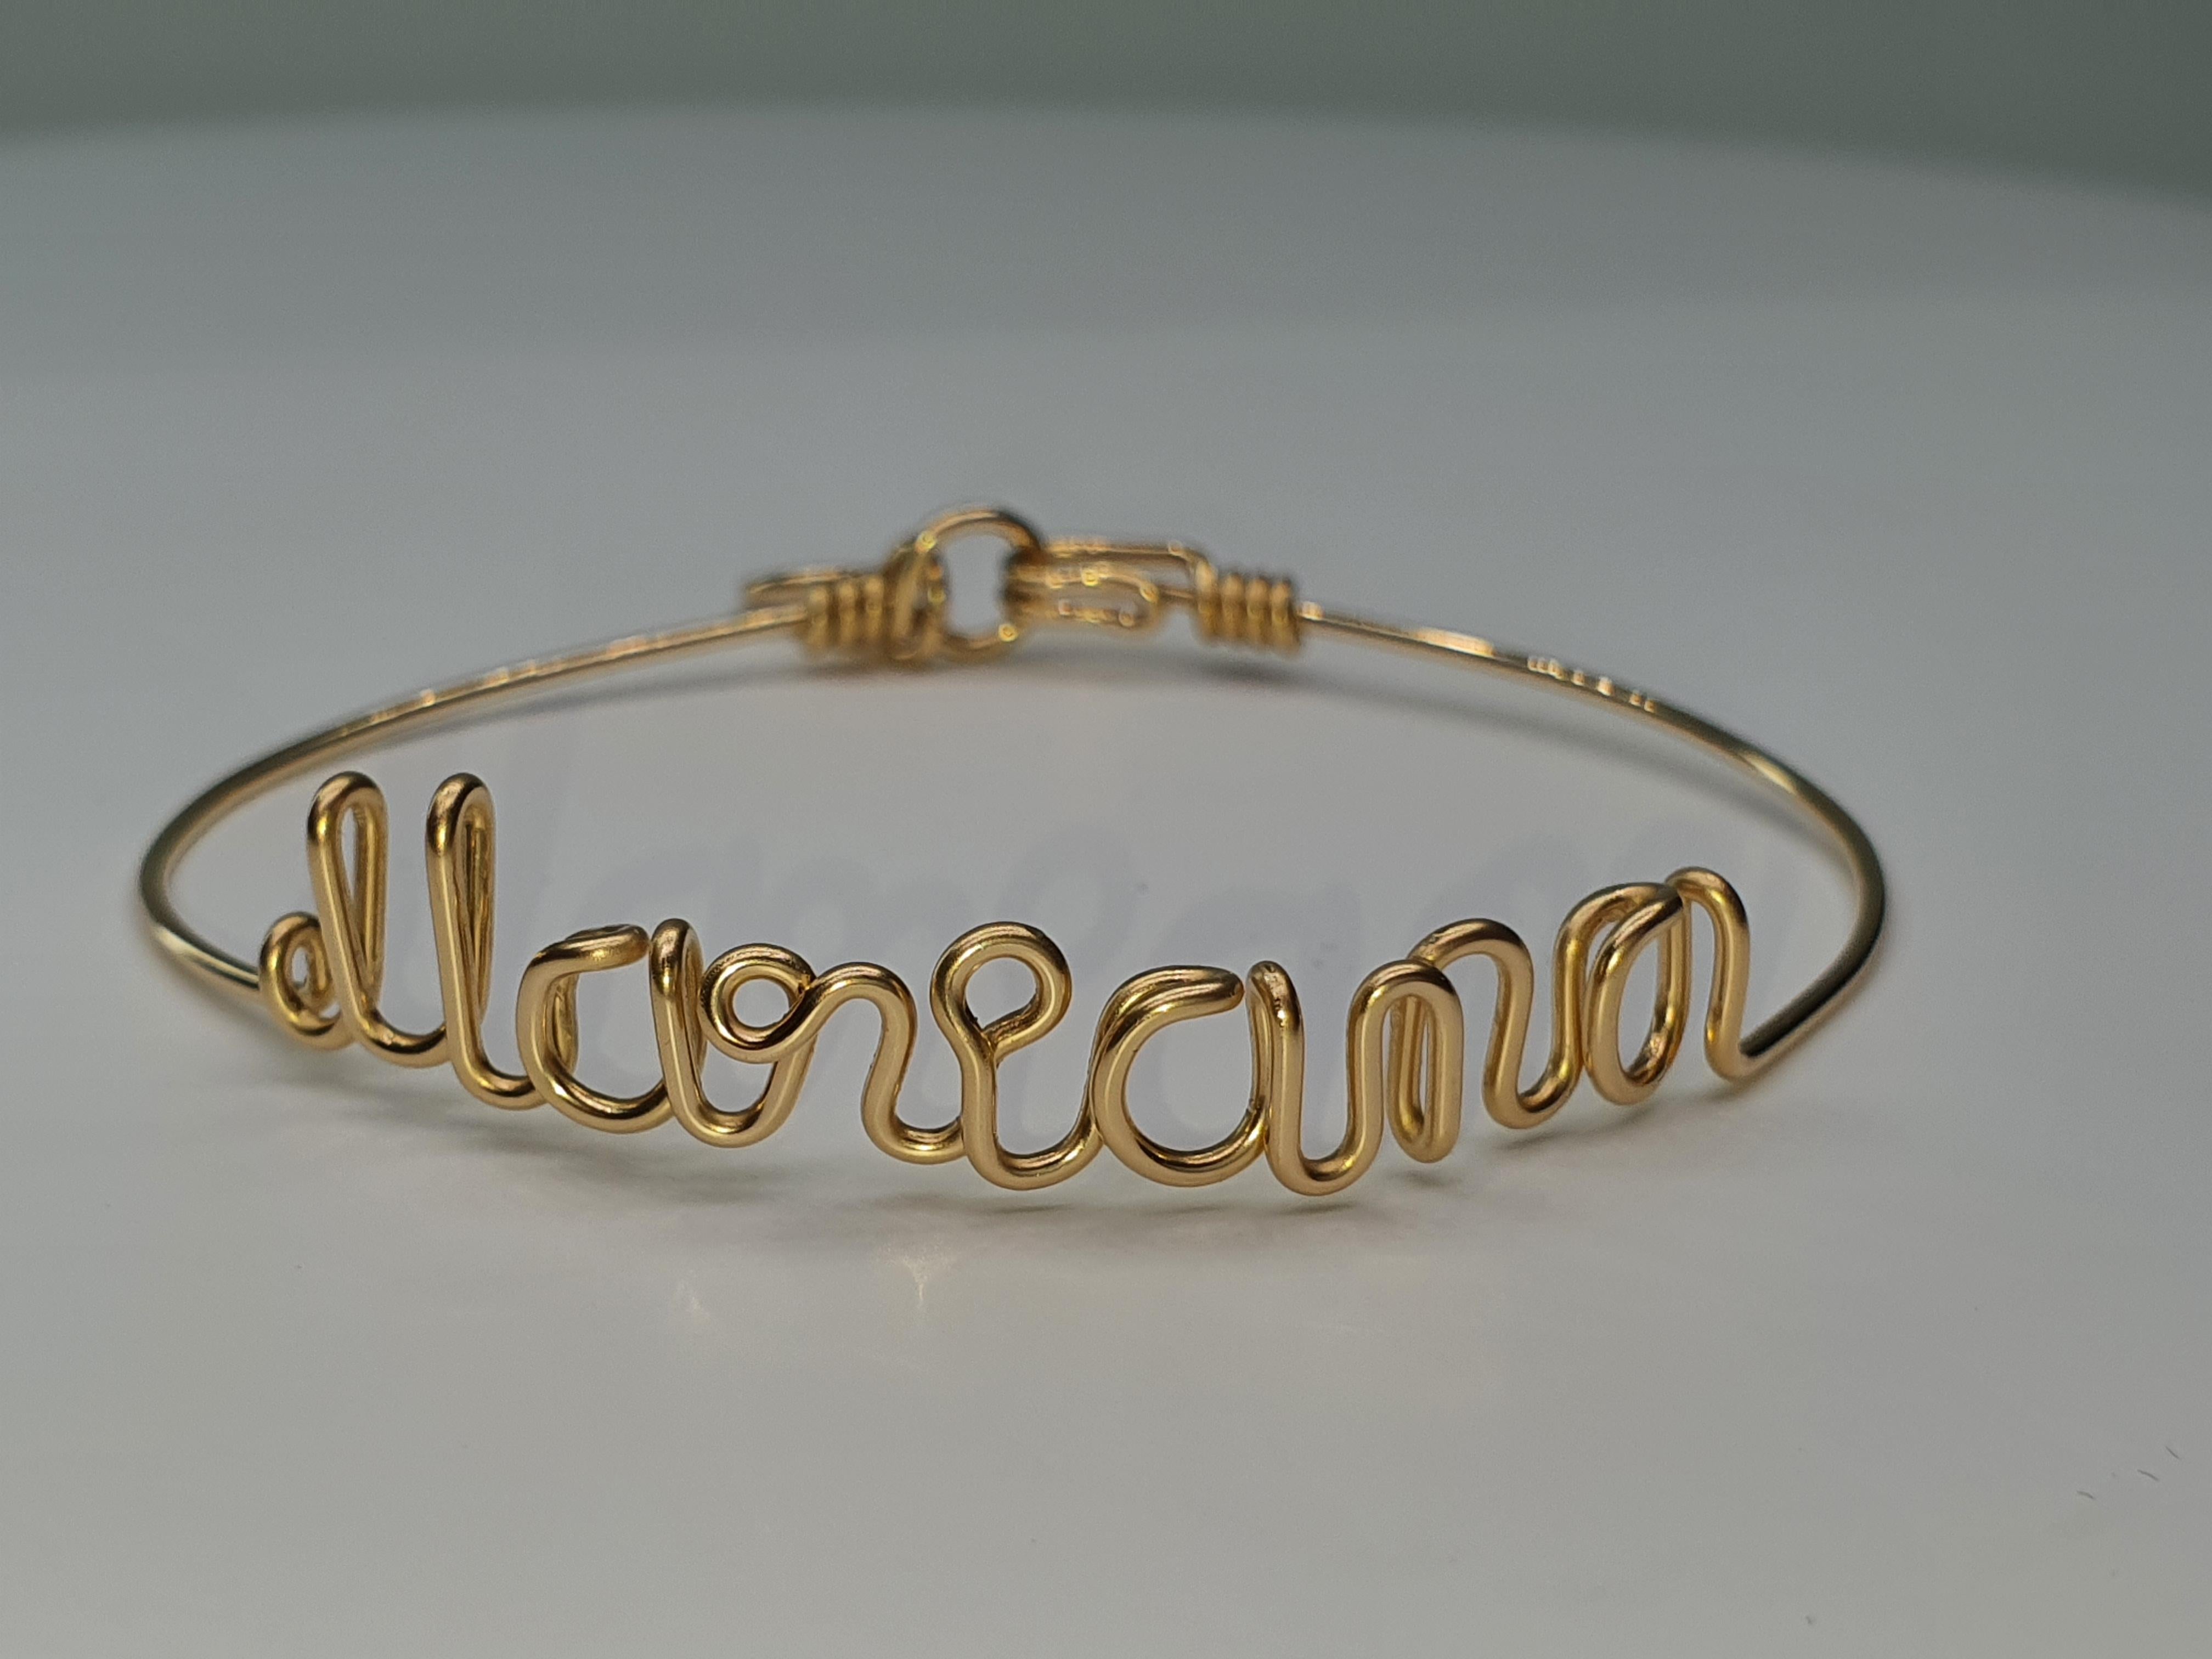 This custom bracelet is the result of meticulous work, entrusted to our talented artisans. Eachpiece is handmade. This personalized jewelry is made out of 14k yellow or pink goldfilled wire, a noble material resulting from a goldsmith's technique. A